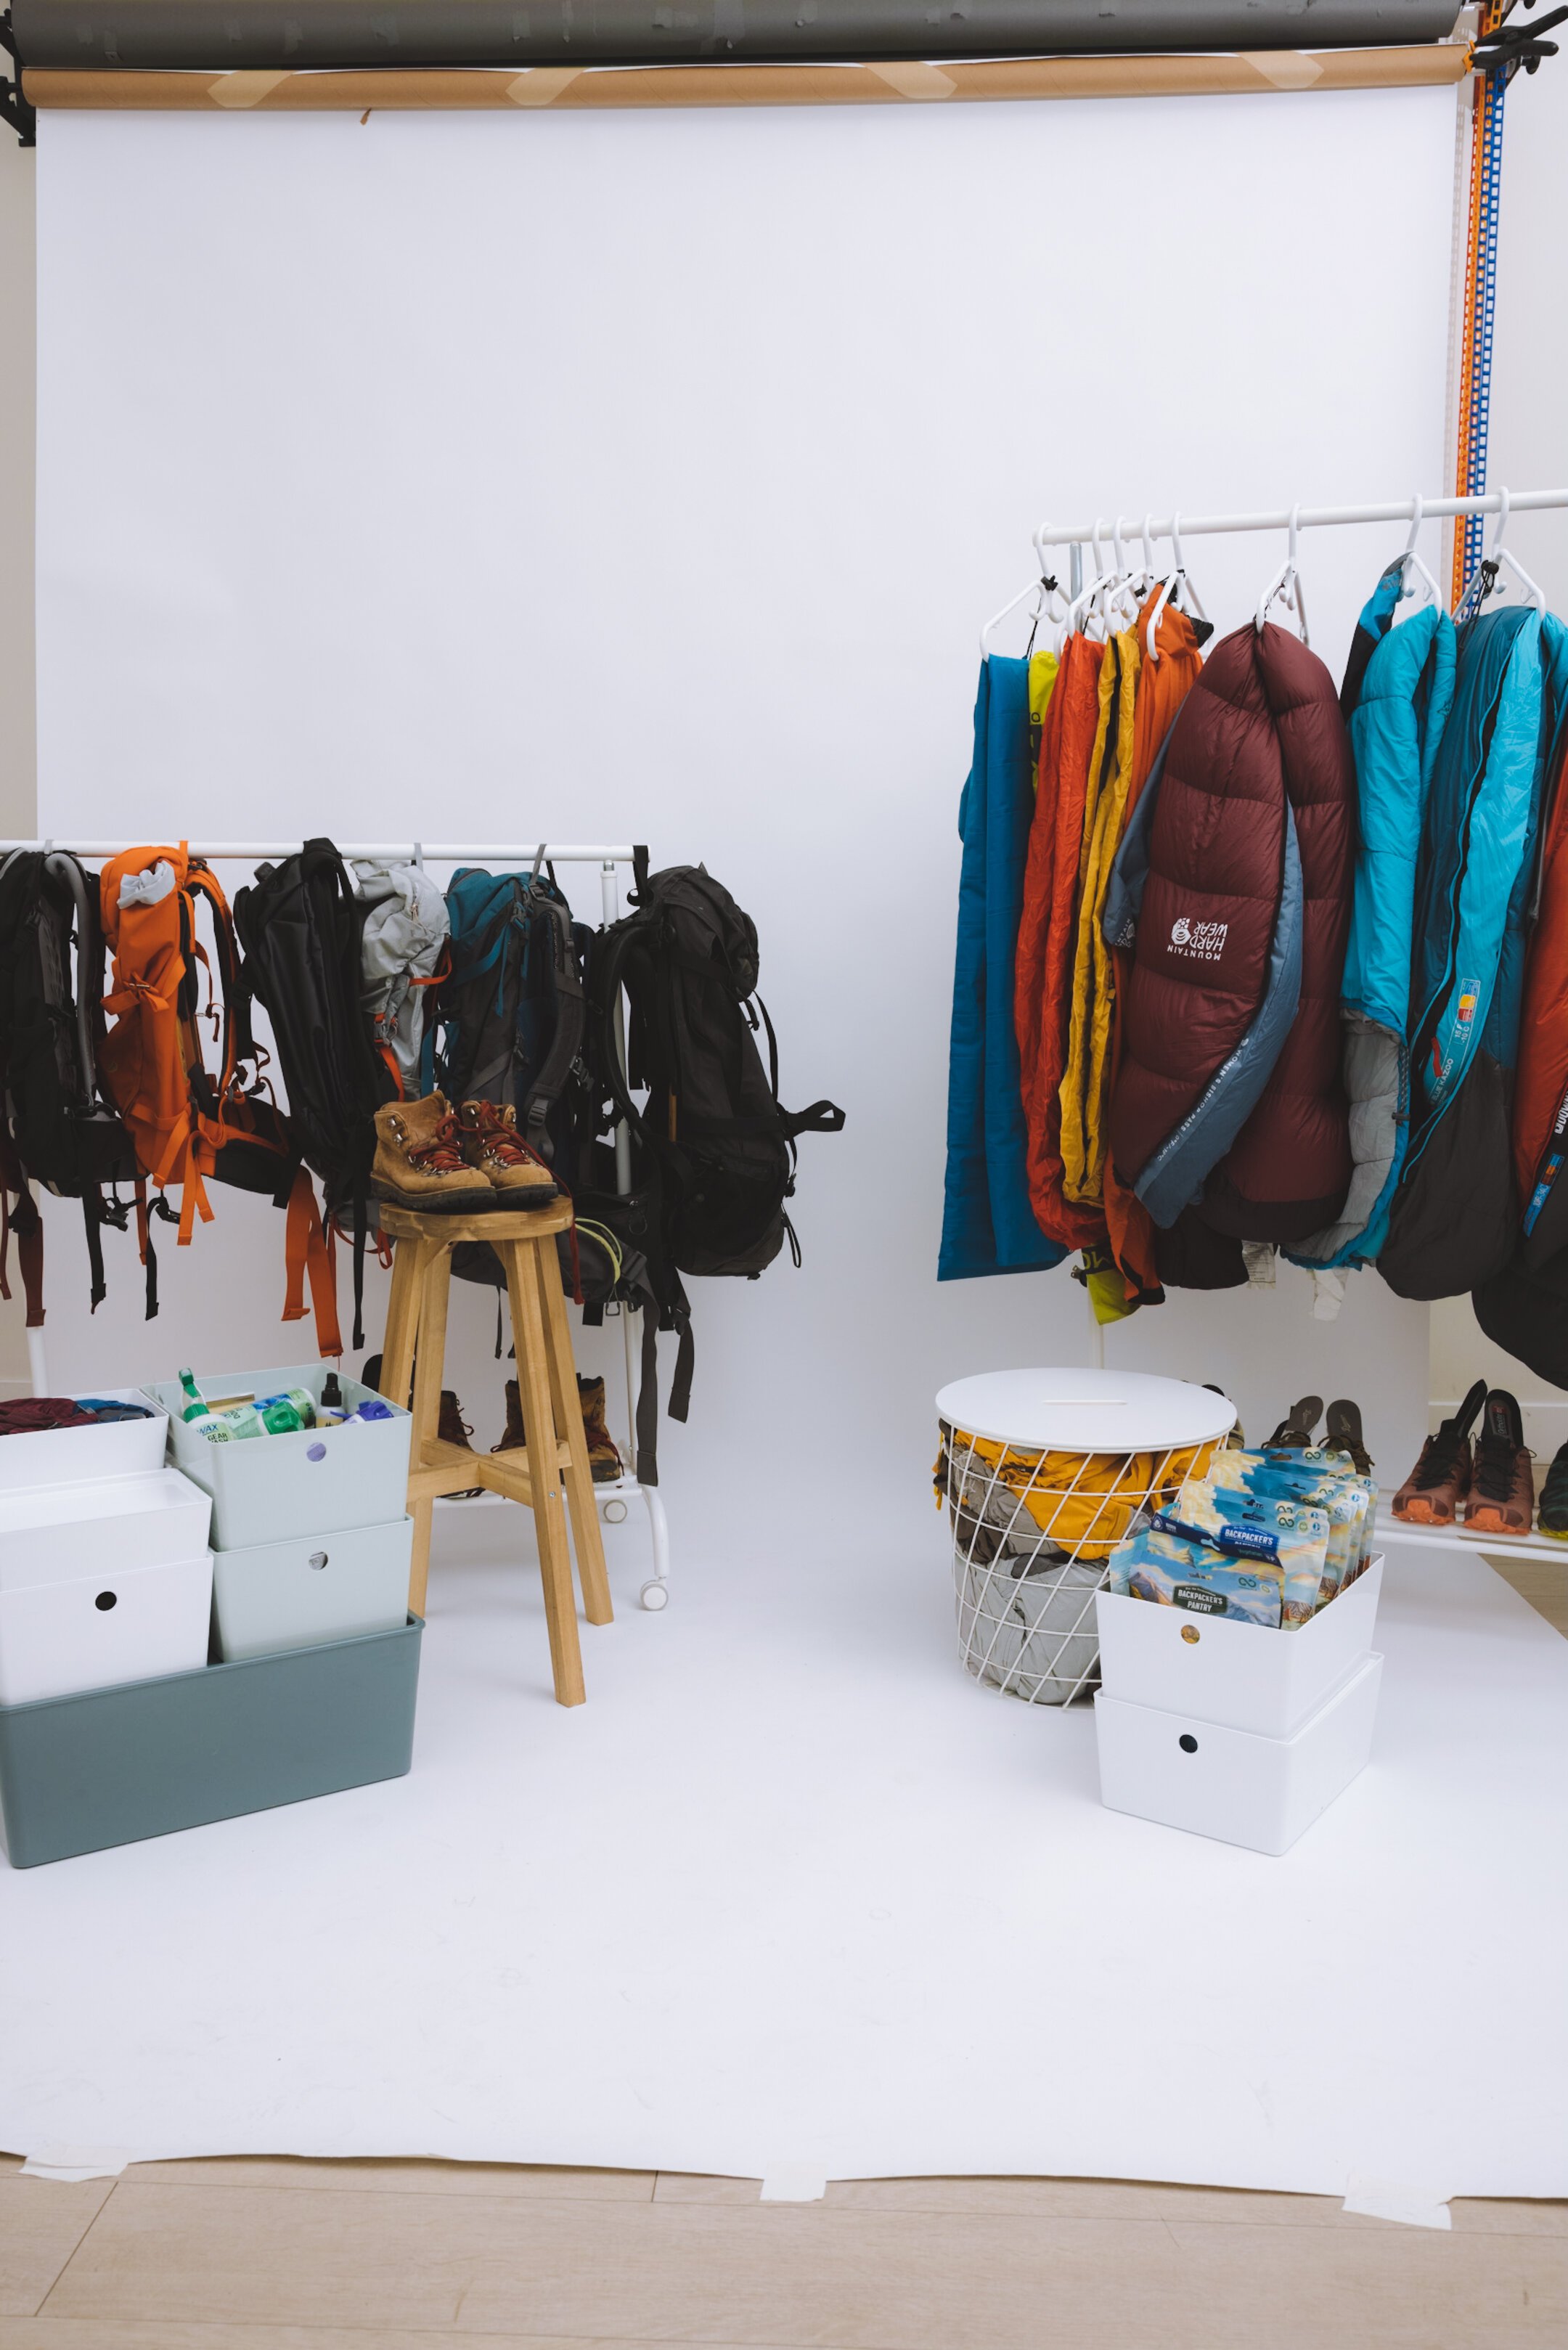 Beginners Guide to outdoor Gear Storage — Andrea Ference